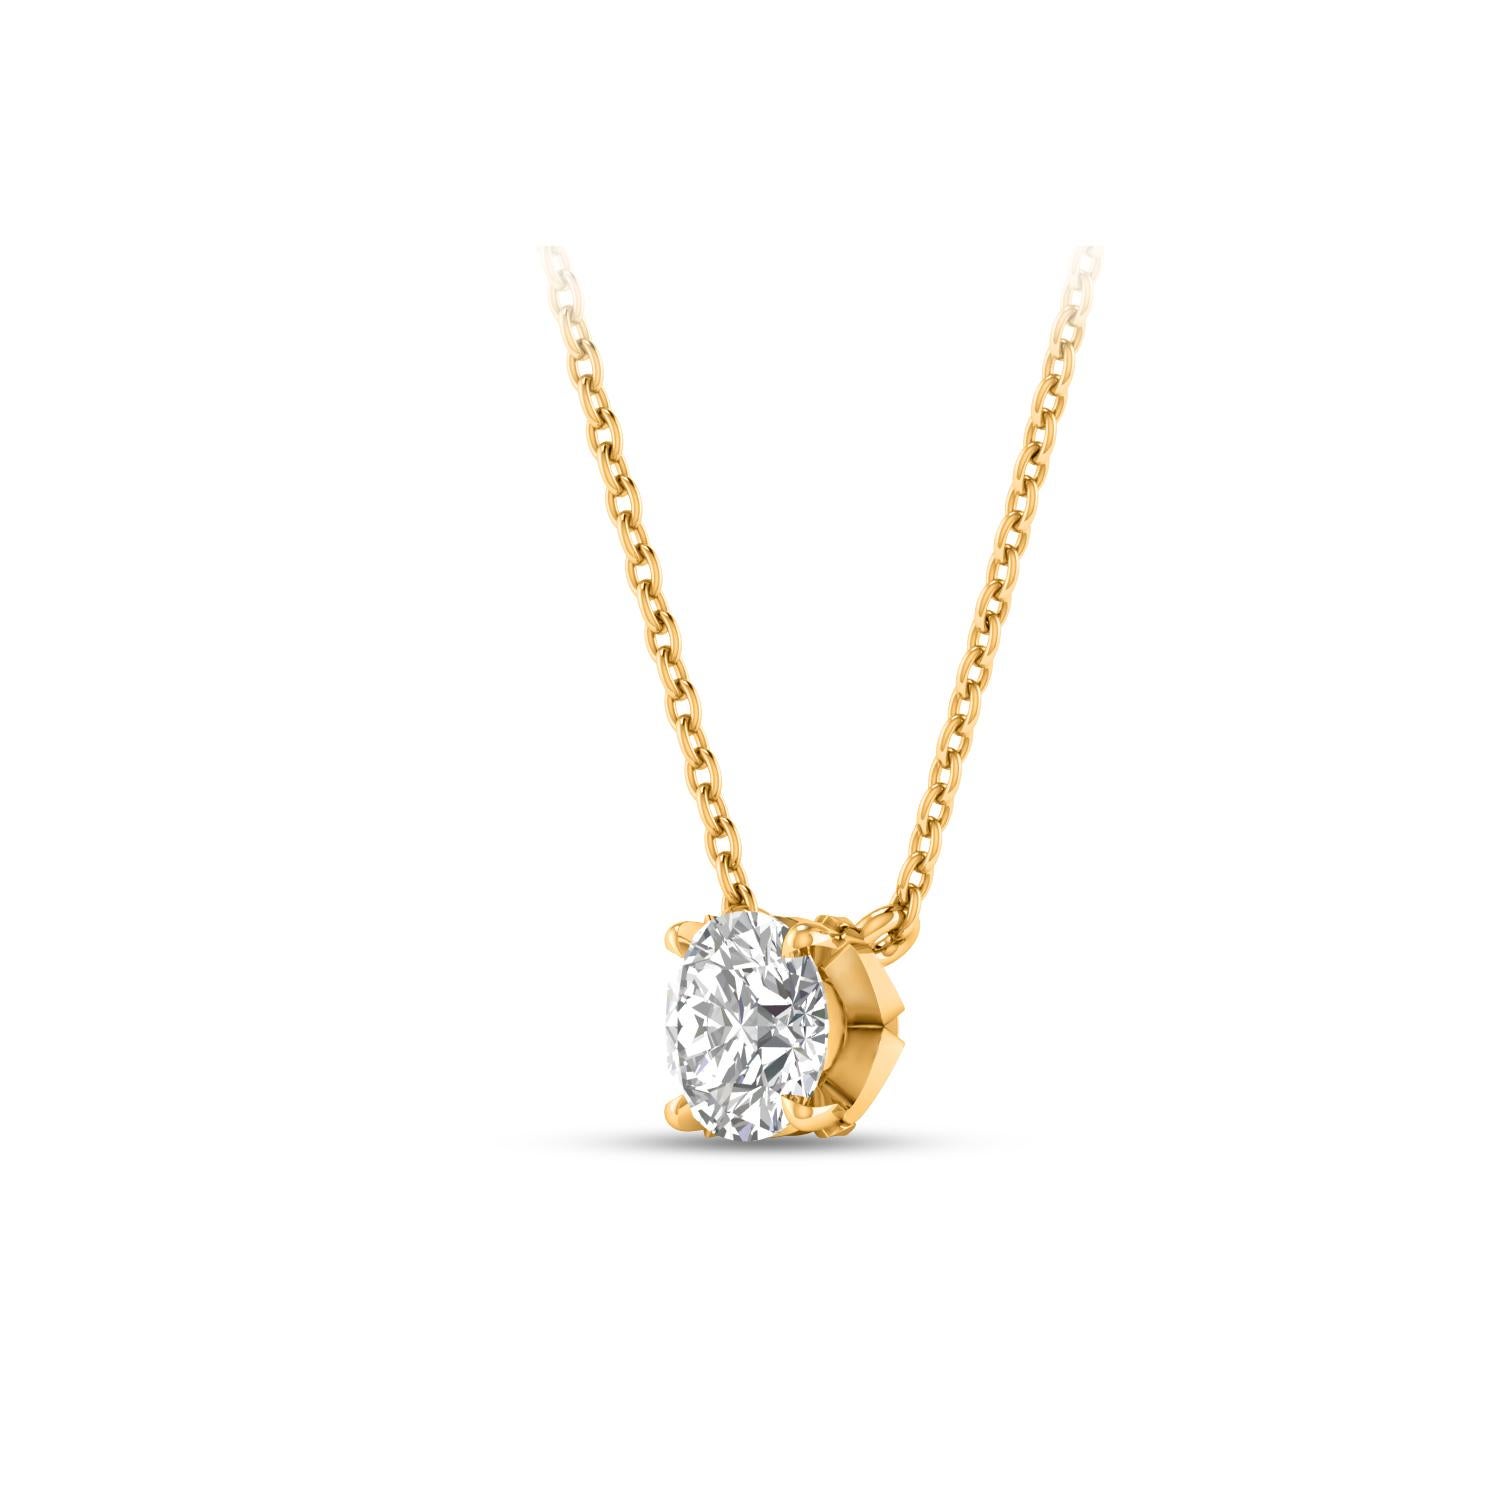  This solitaire diamond necklace features a single, brilliant-cut 0.28 carat diamond in prong setting crafted in 18 KT yellow gold. This elegant necklace includes 20-inch cable chain with extender at 18-inch. 

(Carat weights may vary slightly due